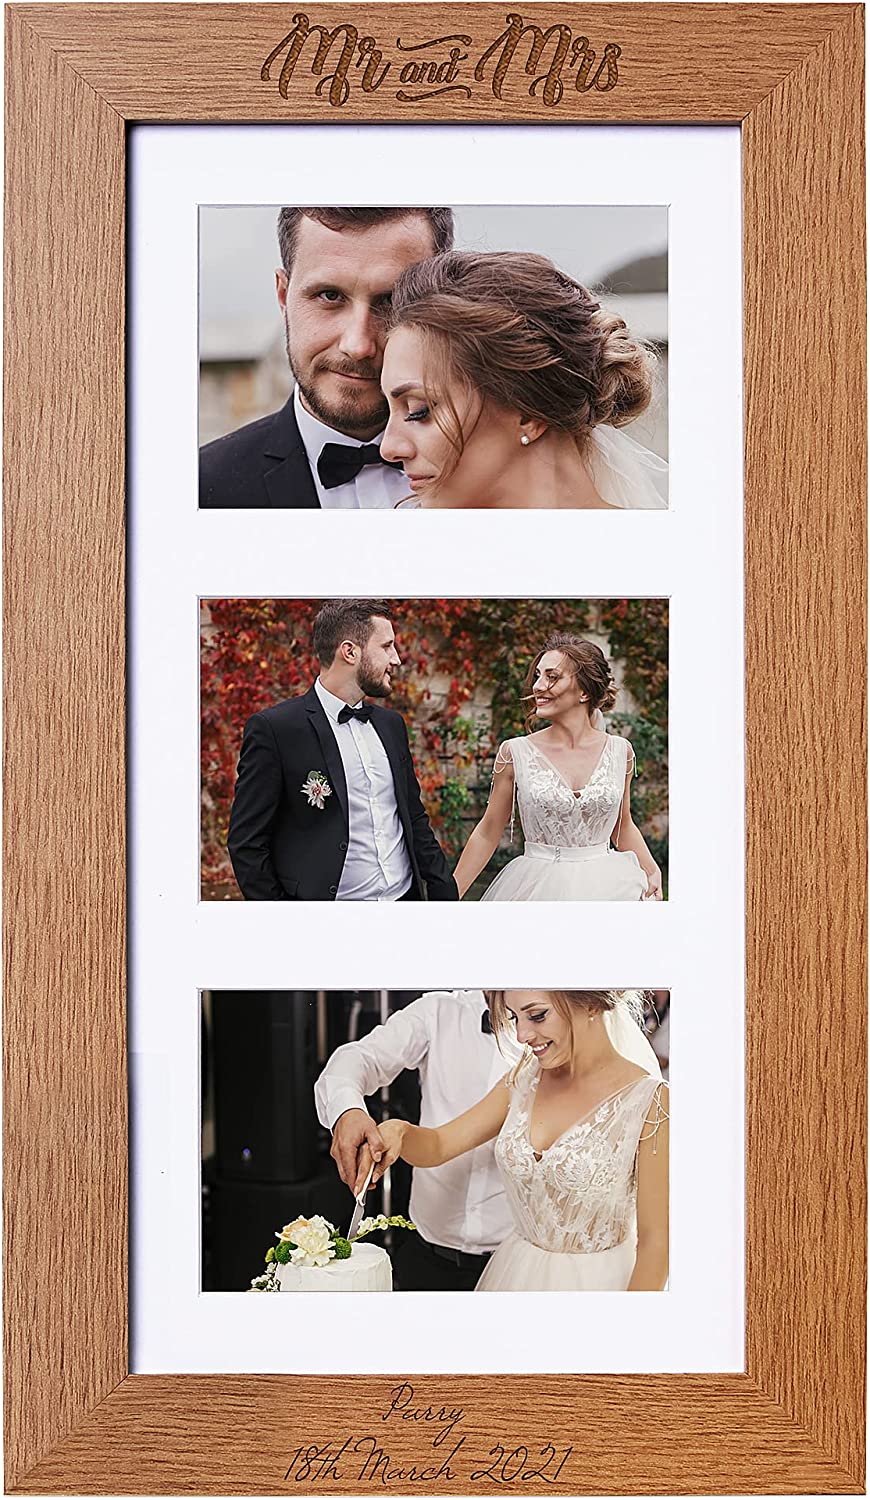 Personalised Mr and Mrs Wedding Wooden Triple Photo 6 x 4 Frame Engraved